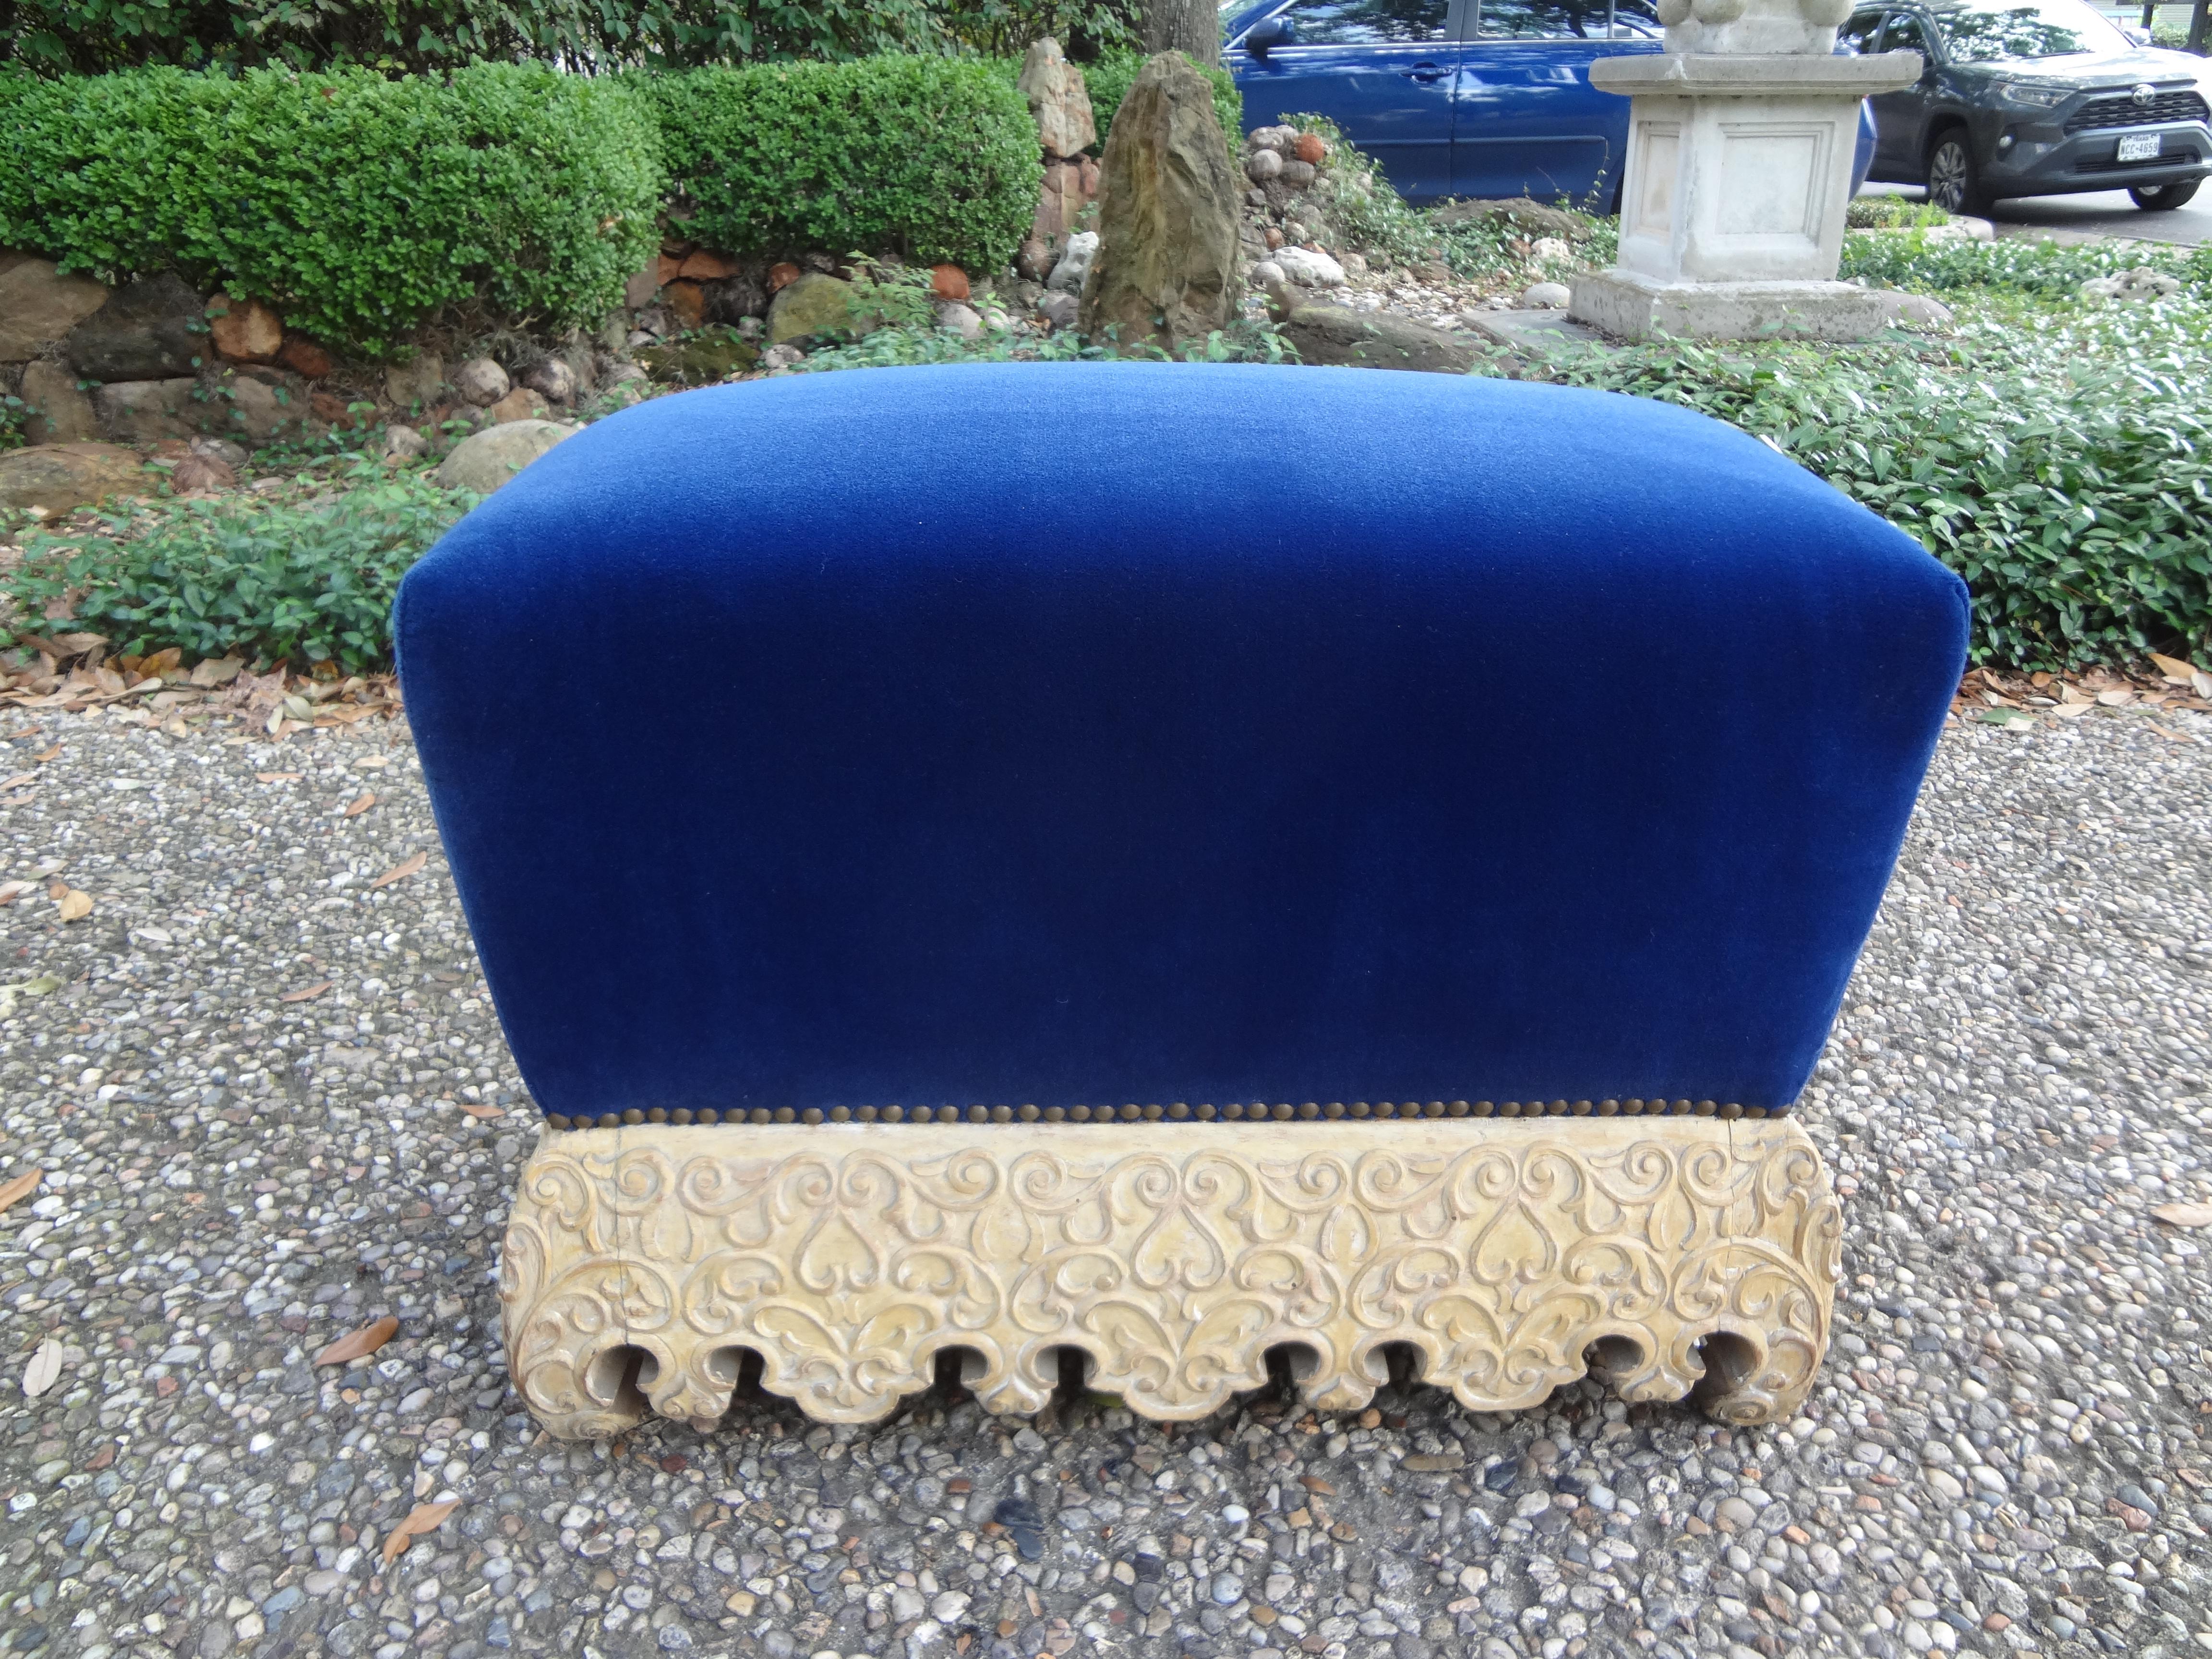 Unusual antique Moroccan, Moorish or Middle Eastern bench, ottoman or pouf. This beautiful antique bench or stool has been newly upholstered in deep blue mohair fabric. Comfortable and versatile, this antique bench will work in a variety of